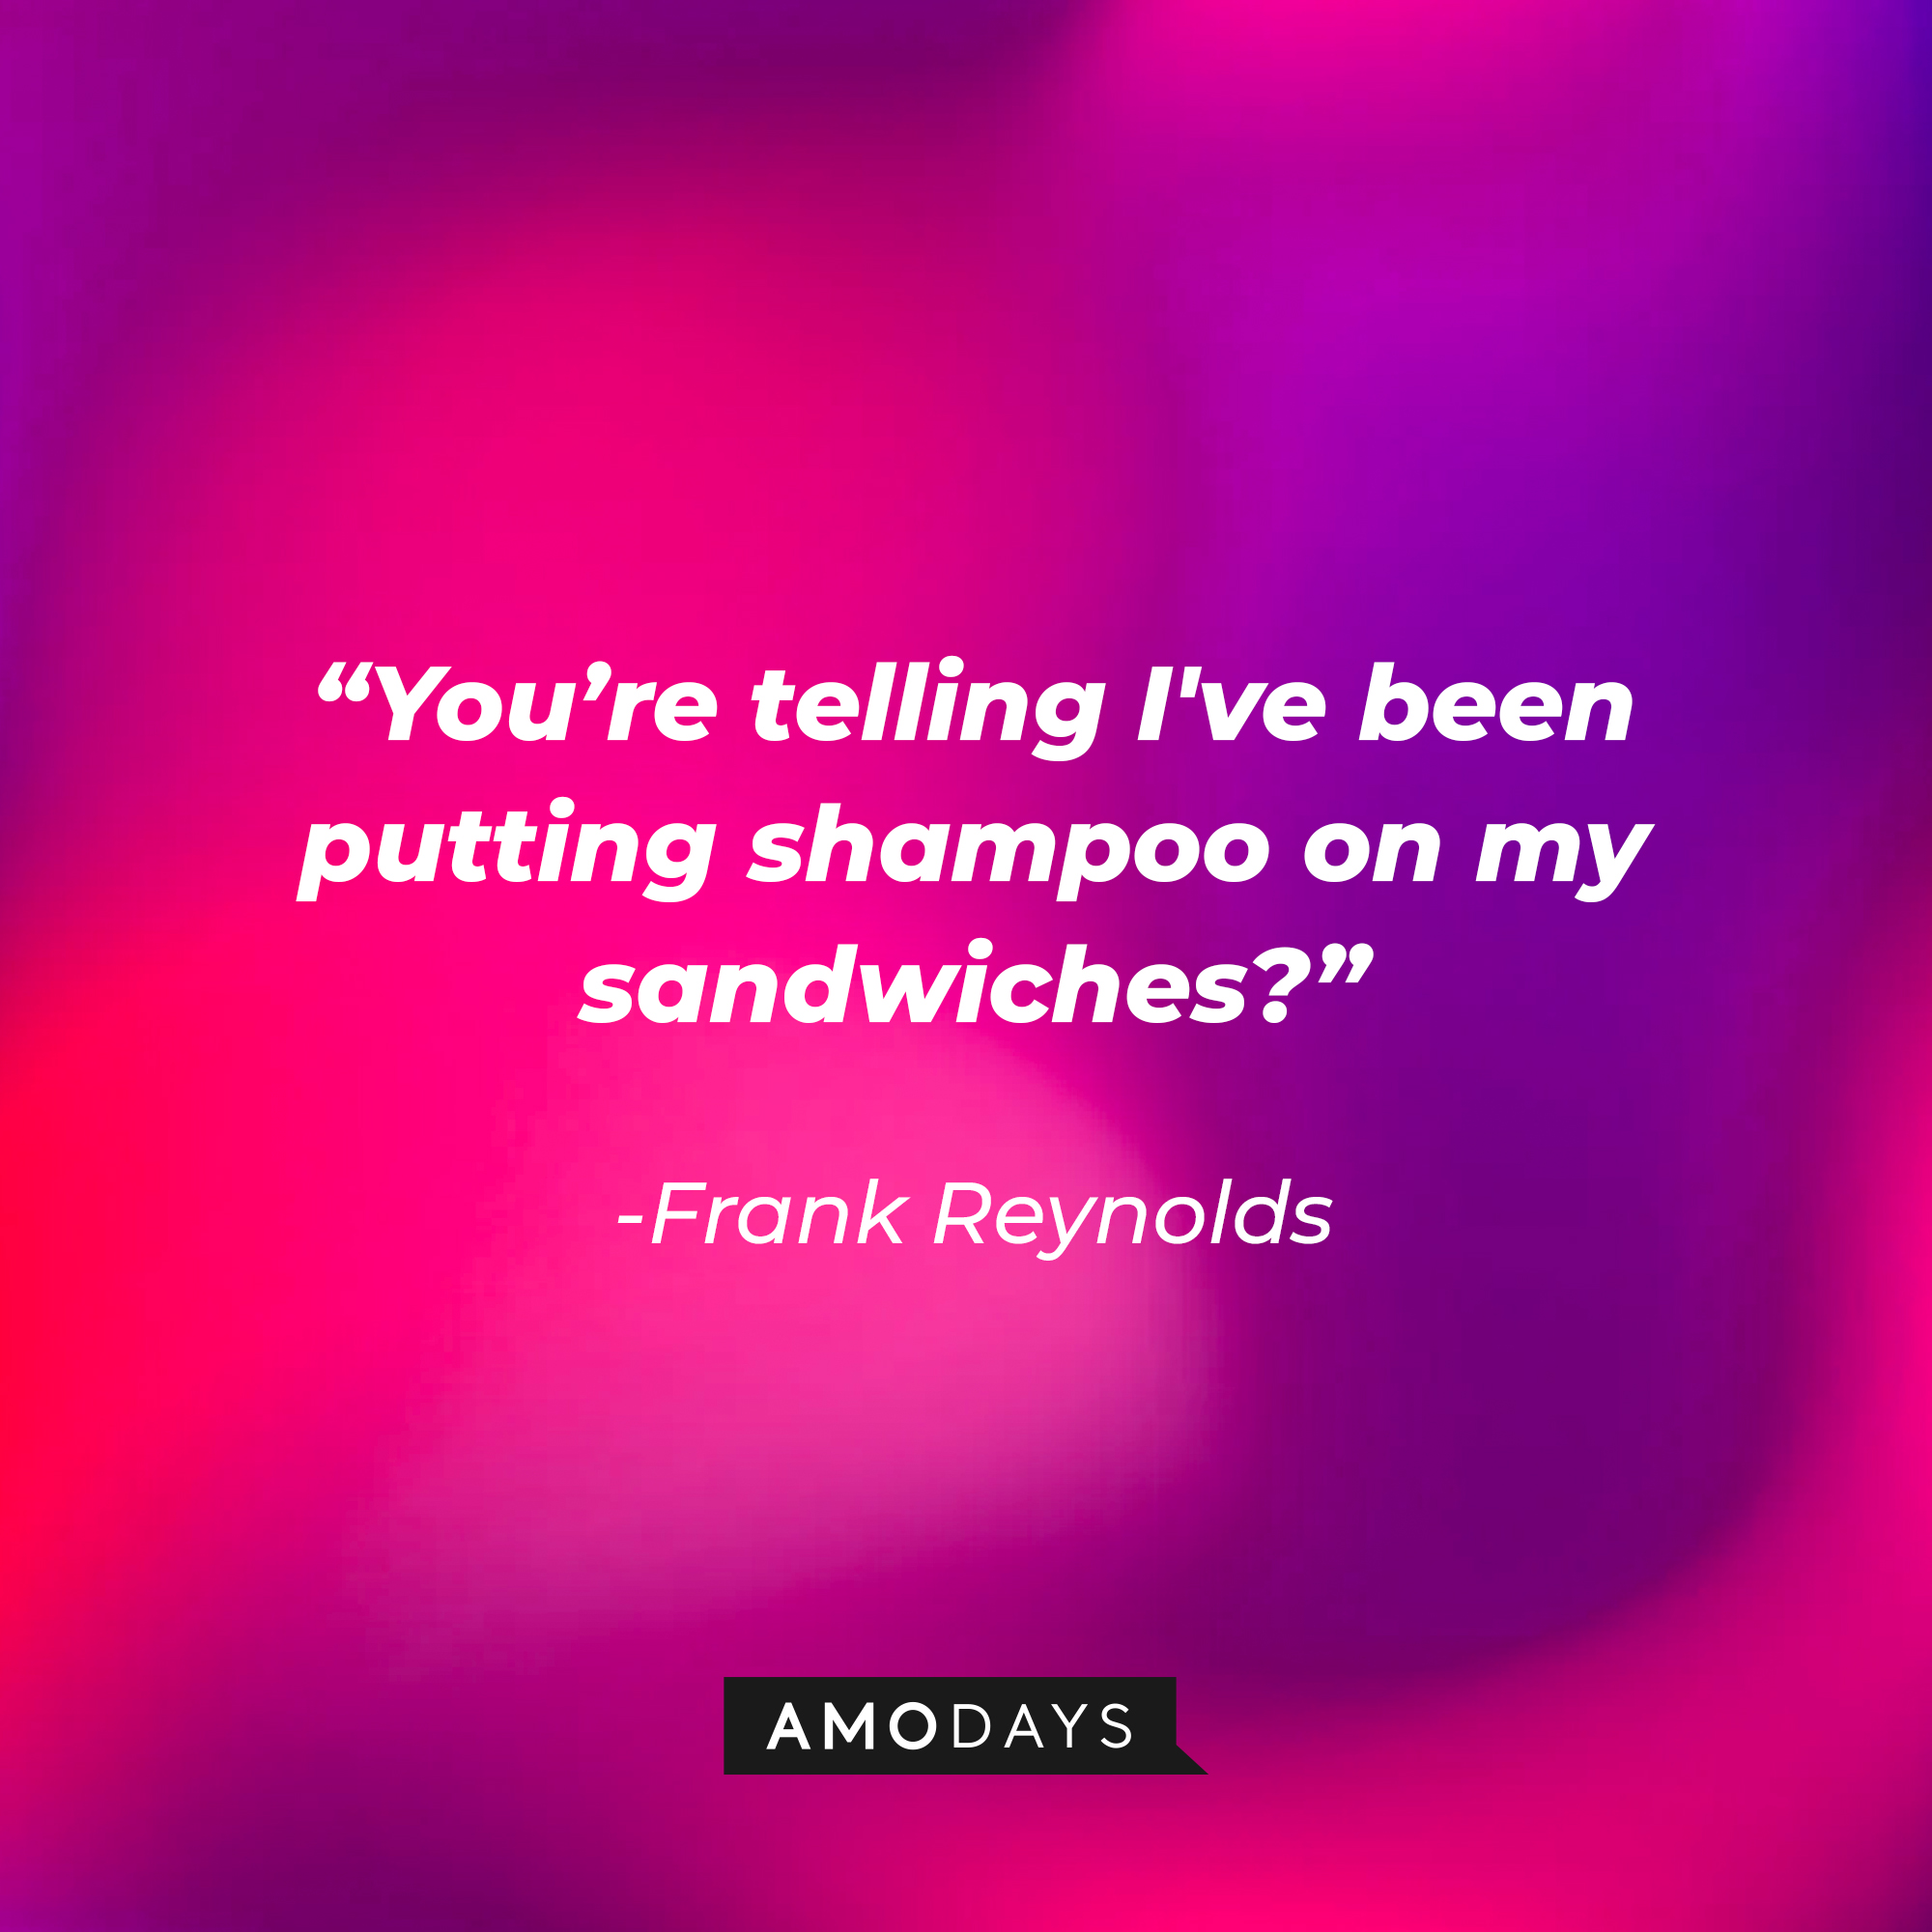 Frank Reynolds quote: “You’re telling I've been putting shampoo on my sandwiches?” | Source: facebook.com/alwayssunny